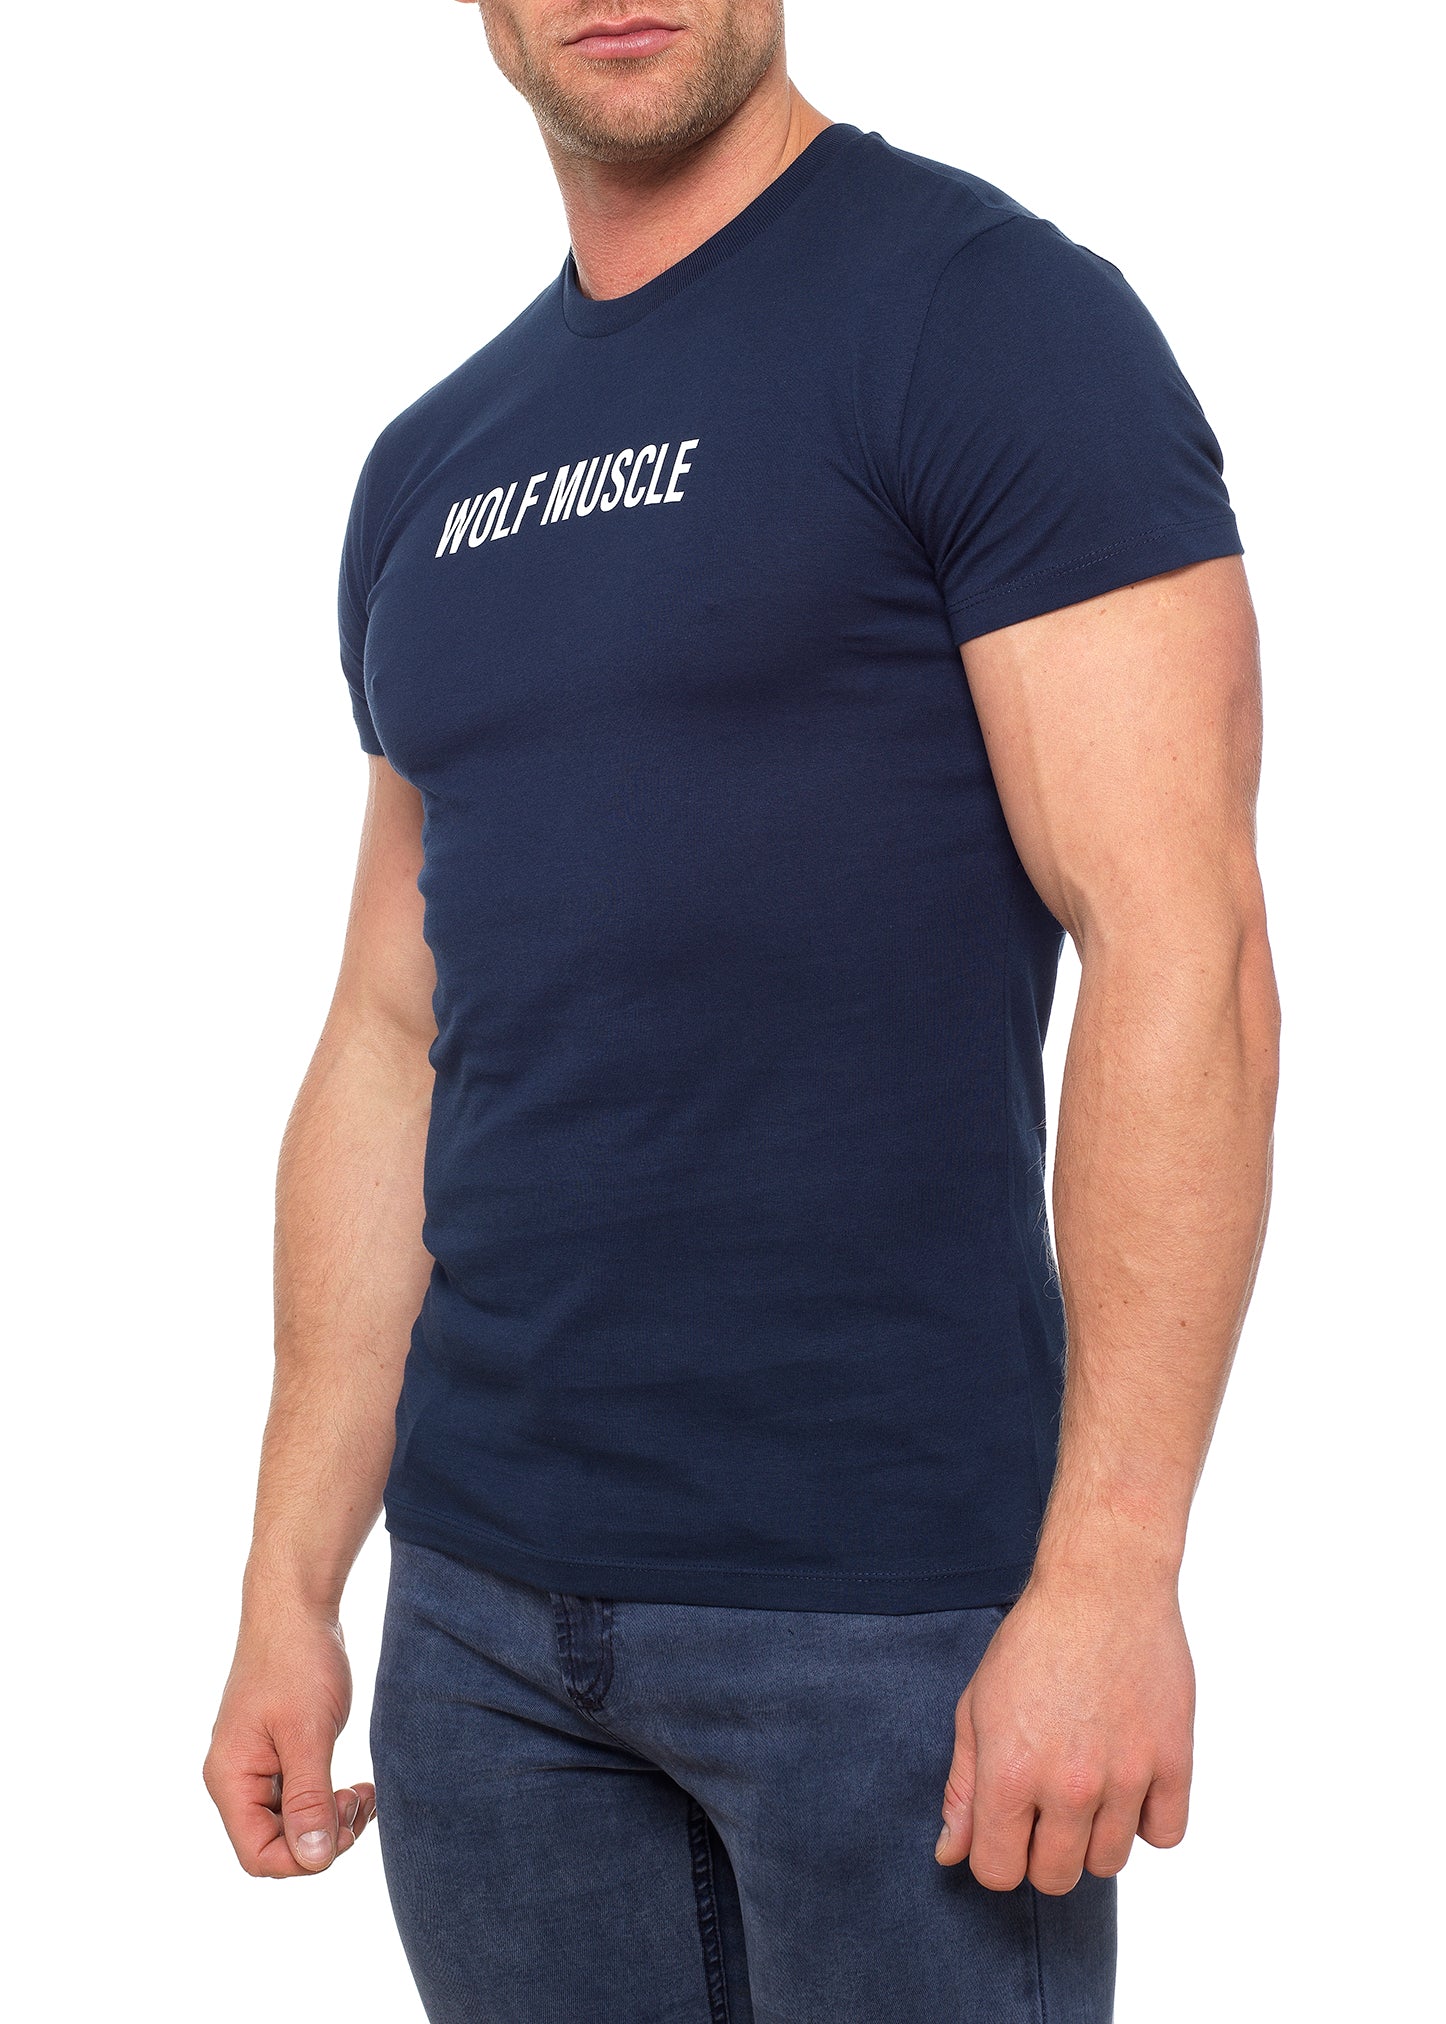 Mens Muscle Fit Navy T Shirt